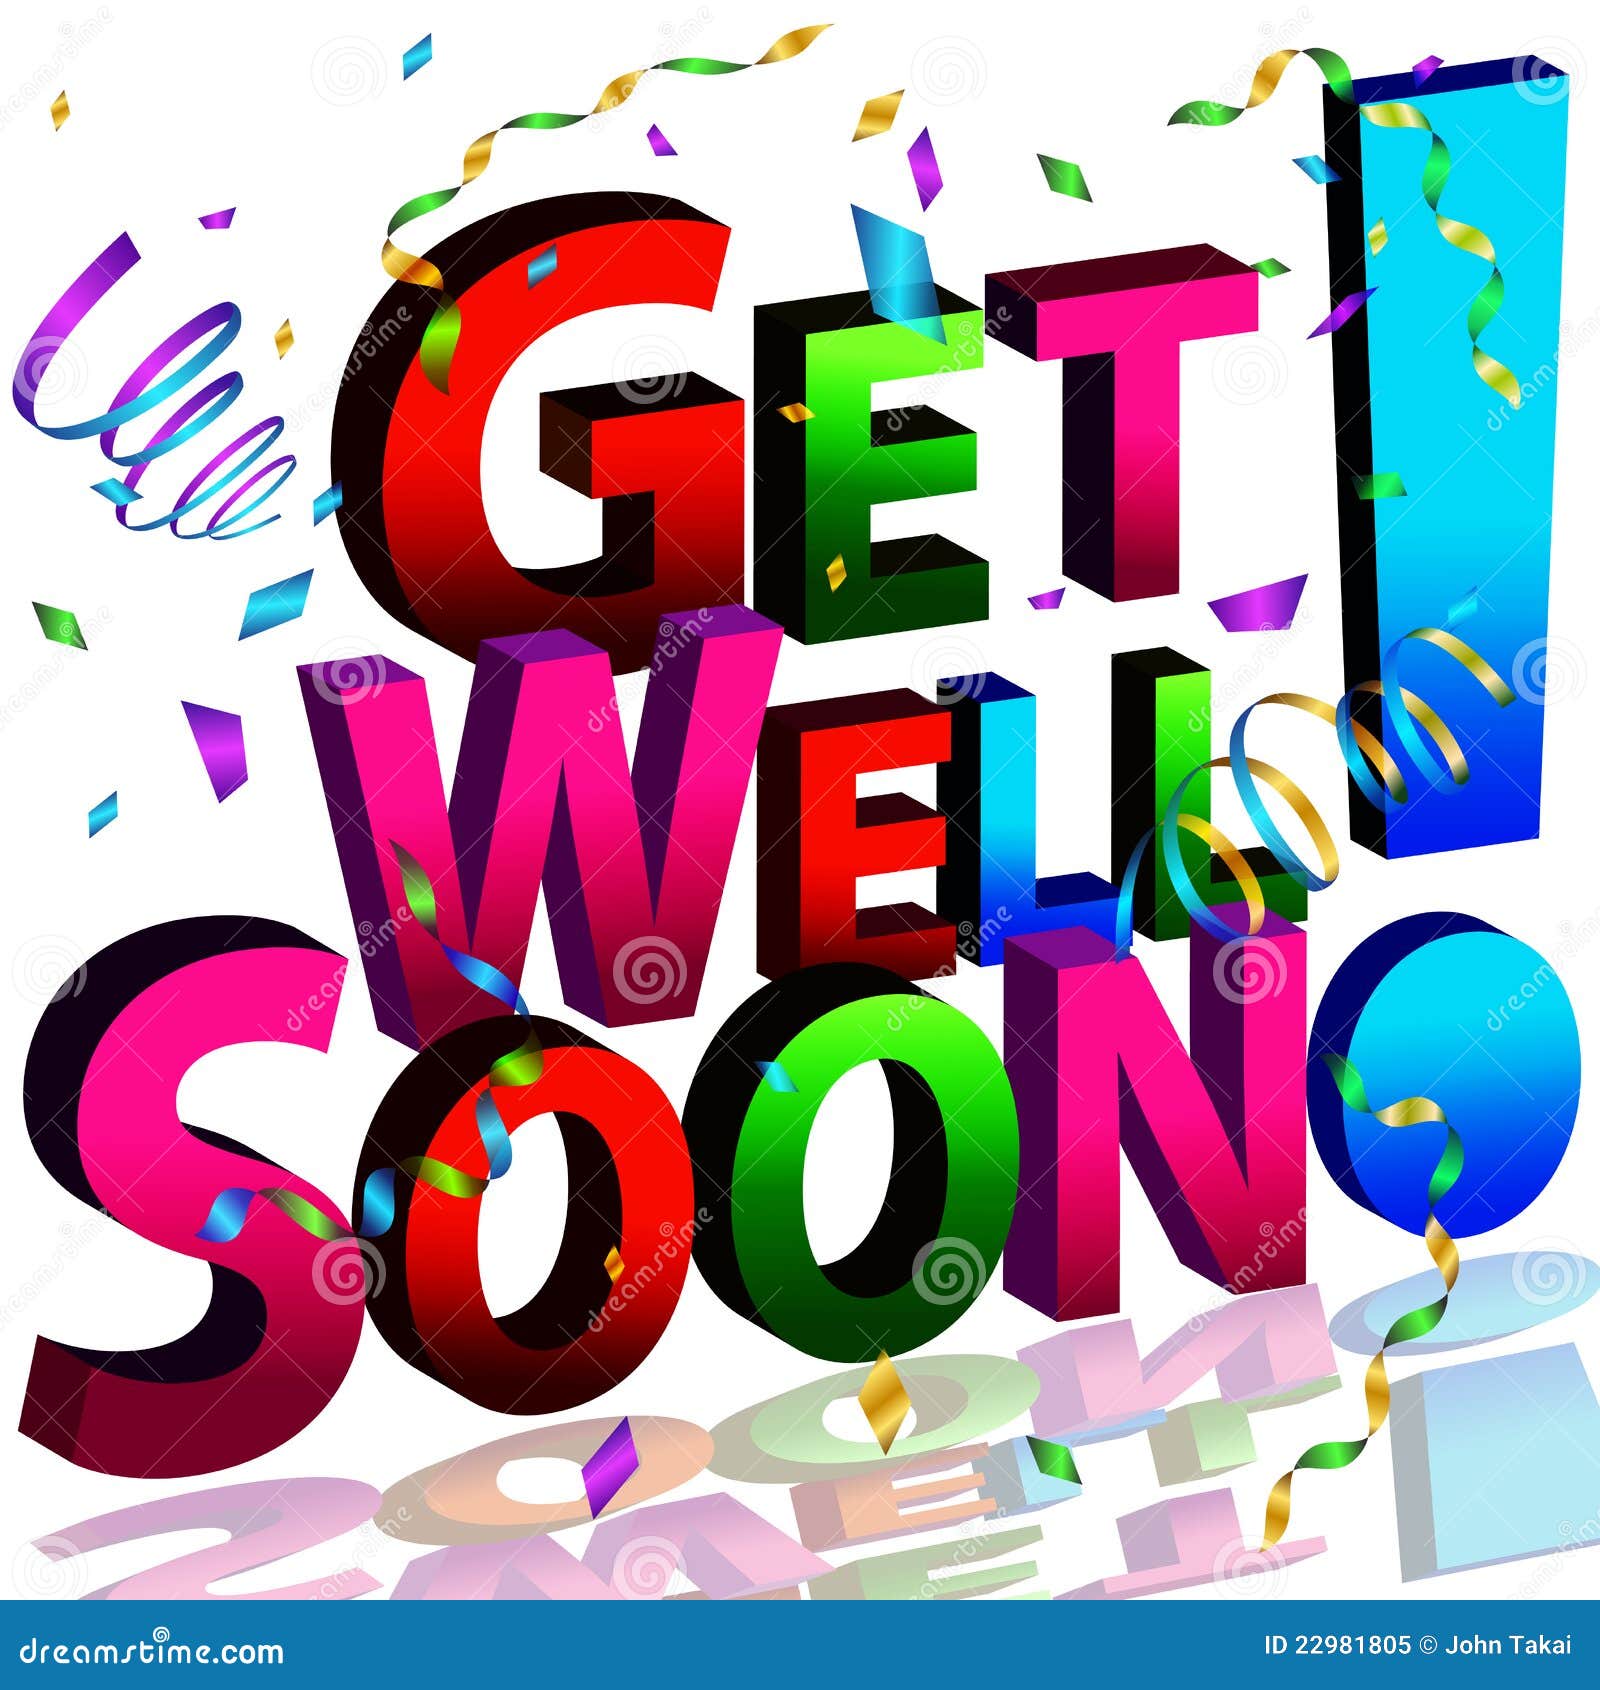 clip art get well wishes - photo #16